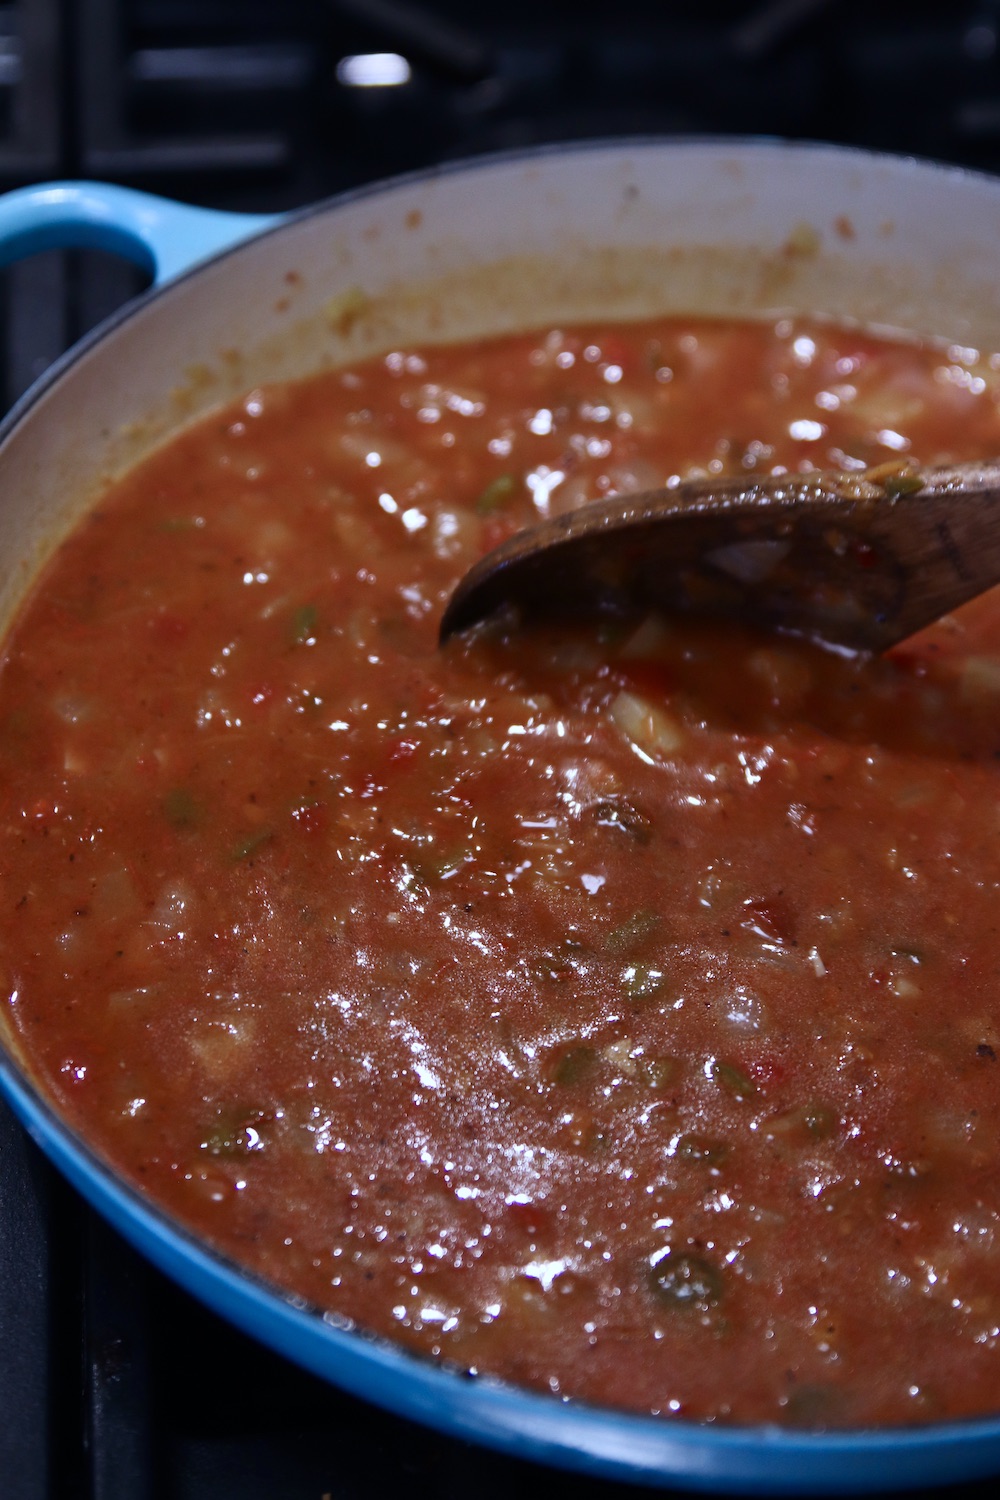 tomato sauce and broth added to vegetables for soup